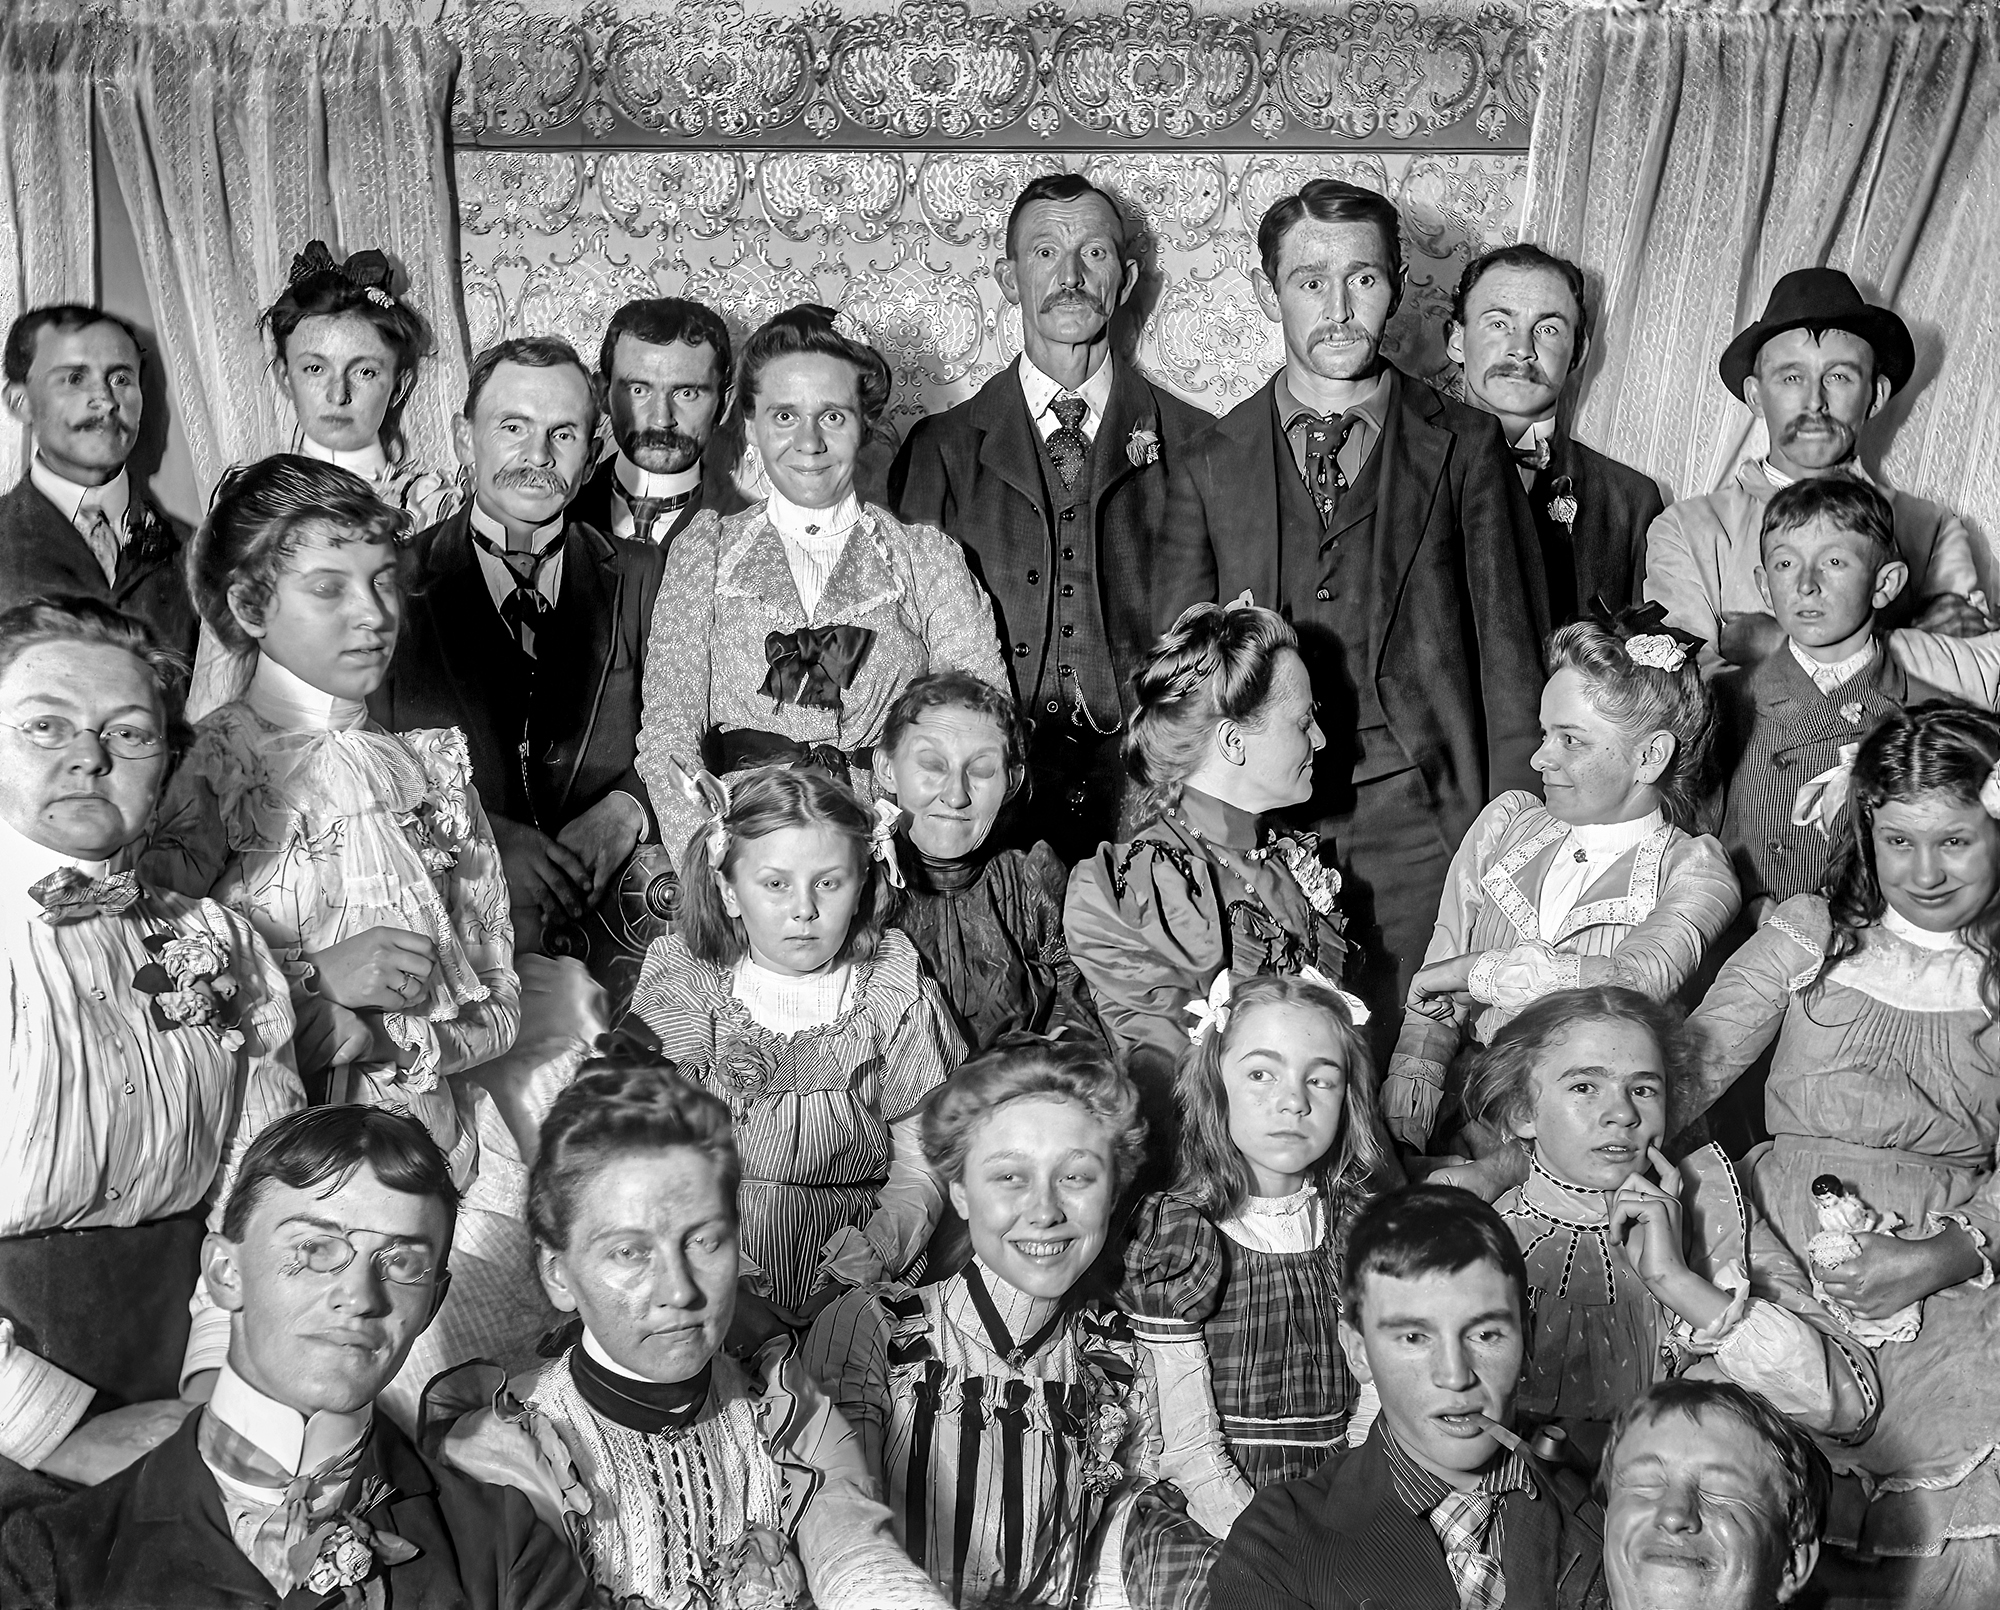 This image was found in a stash of circa 1910 glass negatives from Floyd Ingraham, who lived in Springwater, New York. I know nothing about who's here or why they were gathered in someone's parlor, but I love its Norman Rockwell vibe. Every face looks like one of his subjects. Scanned from a 4x5 inch glass plate. View full size.